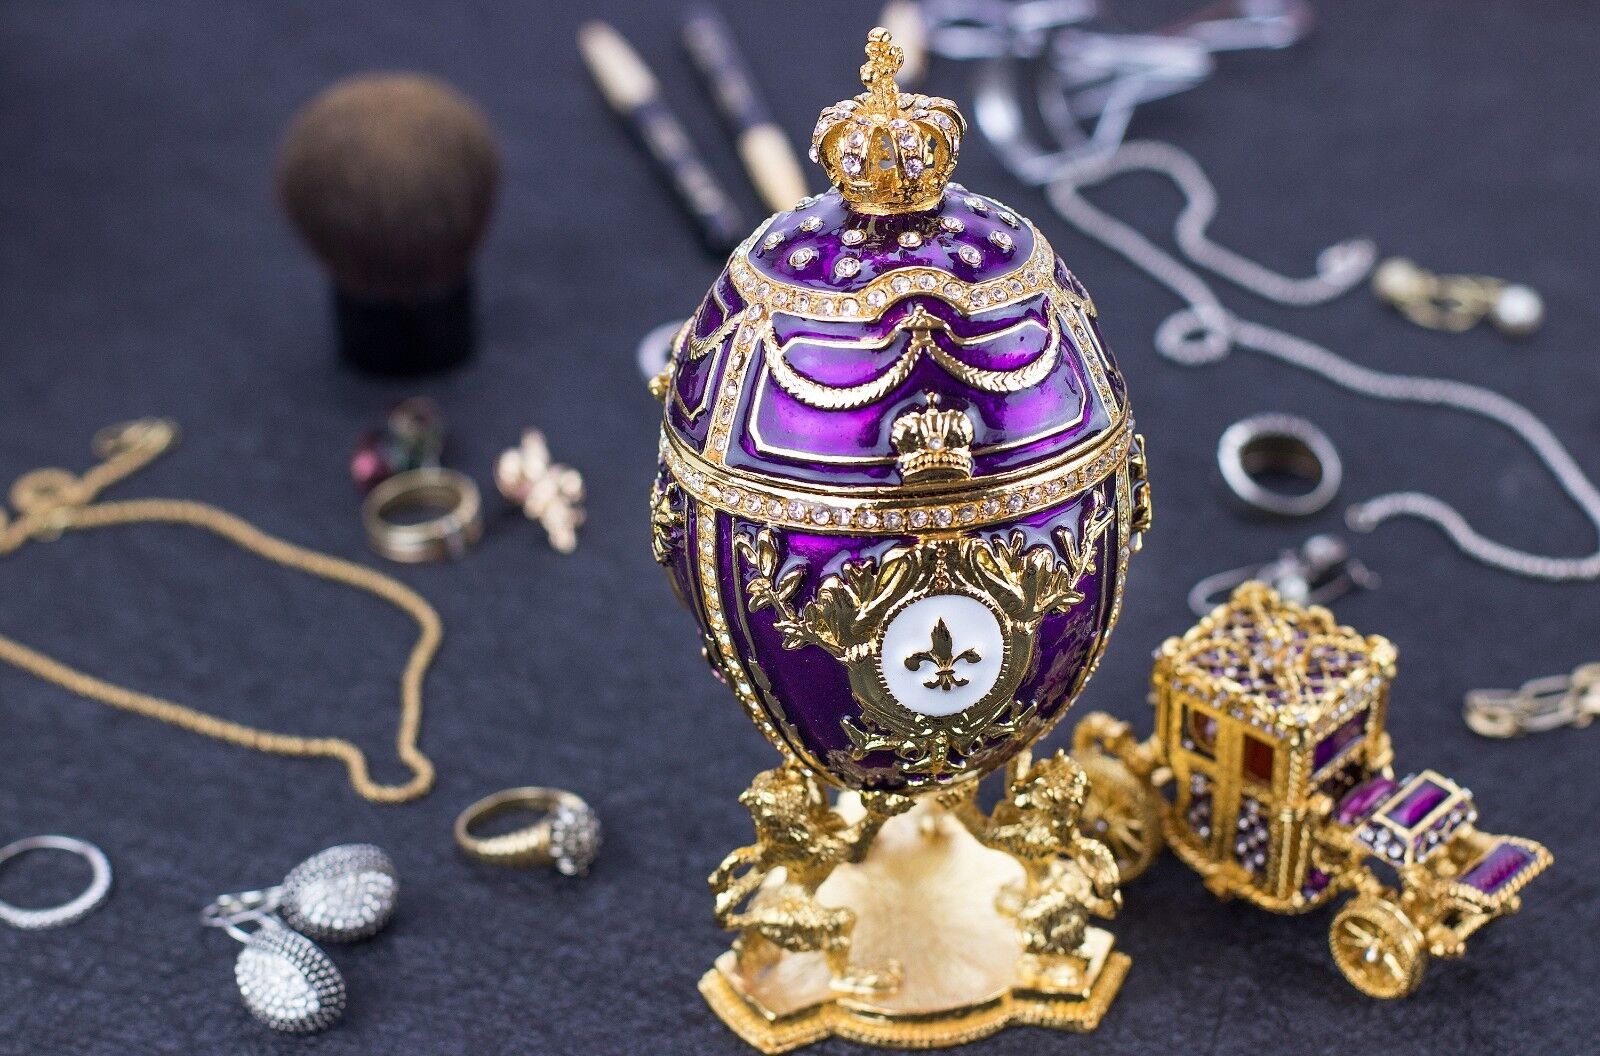 Royal Imperial Purple Faberge Egg Replica : Large 6.6 inch + Carriage by Vtry